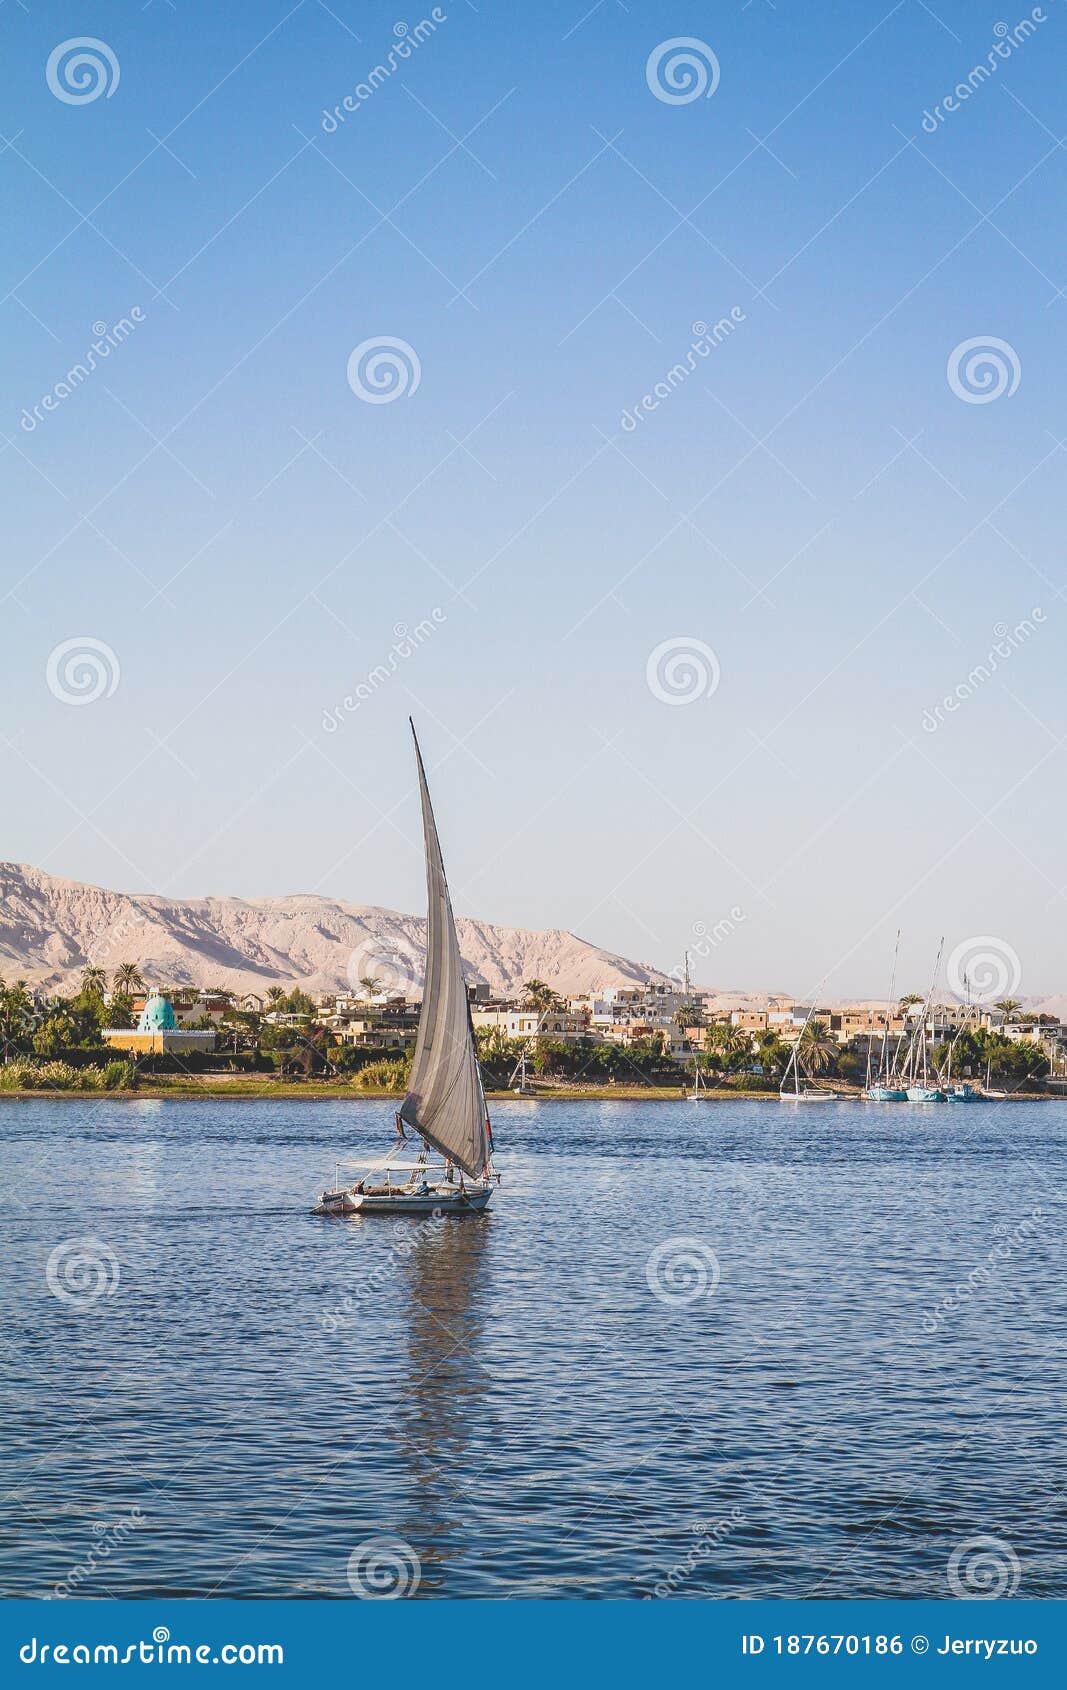 a boat sailing on nile rive in egypt.